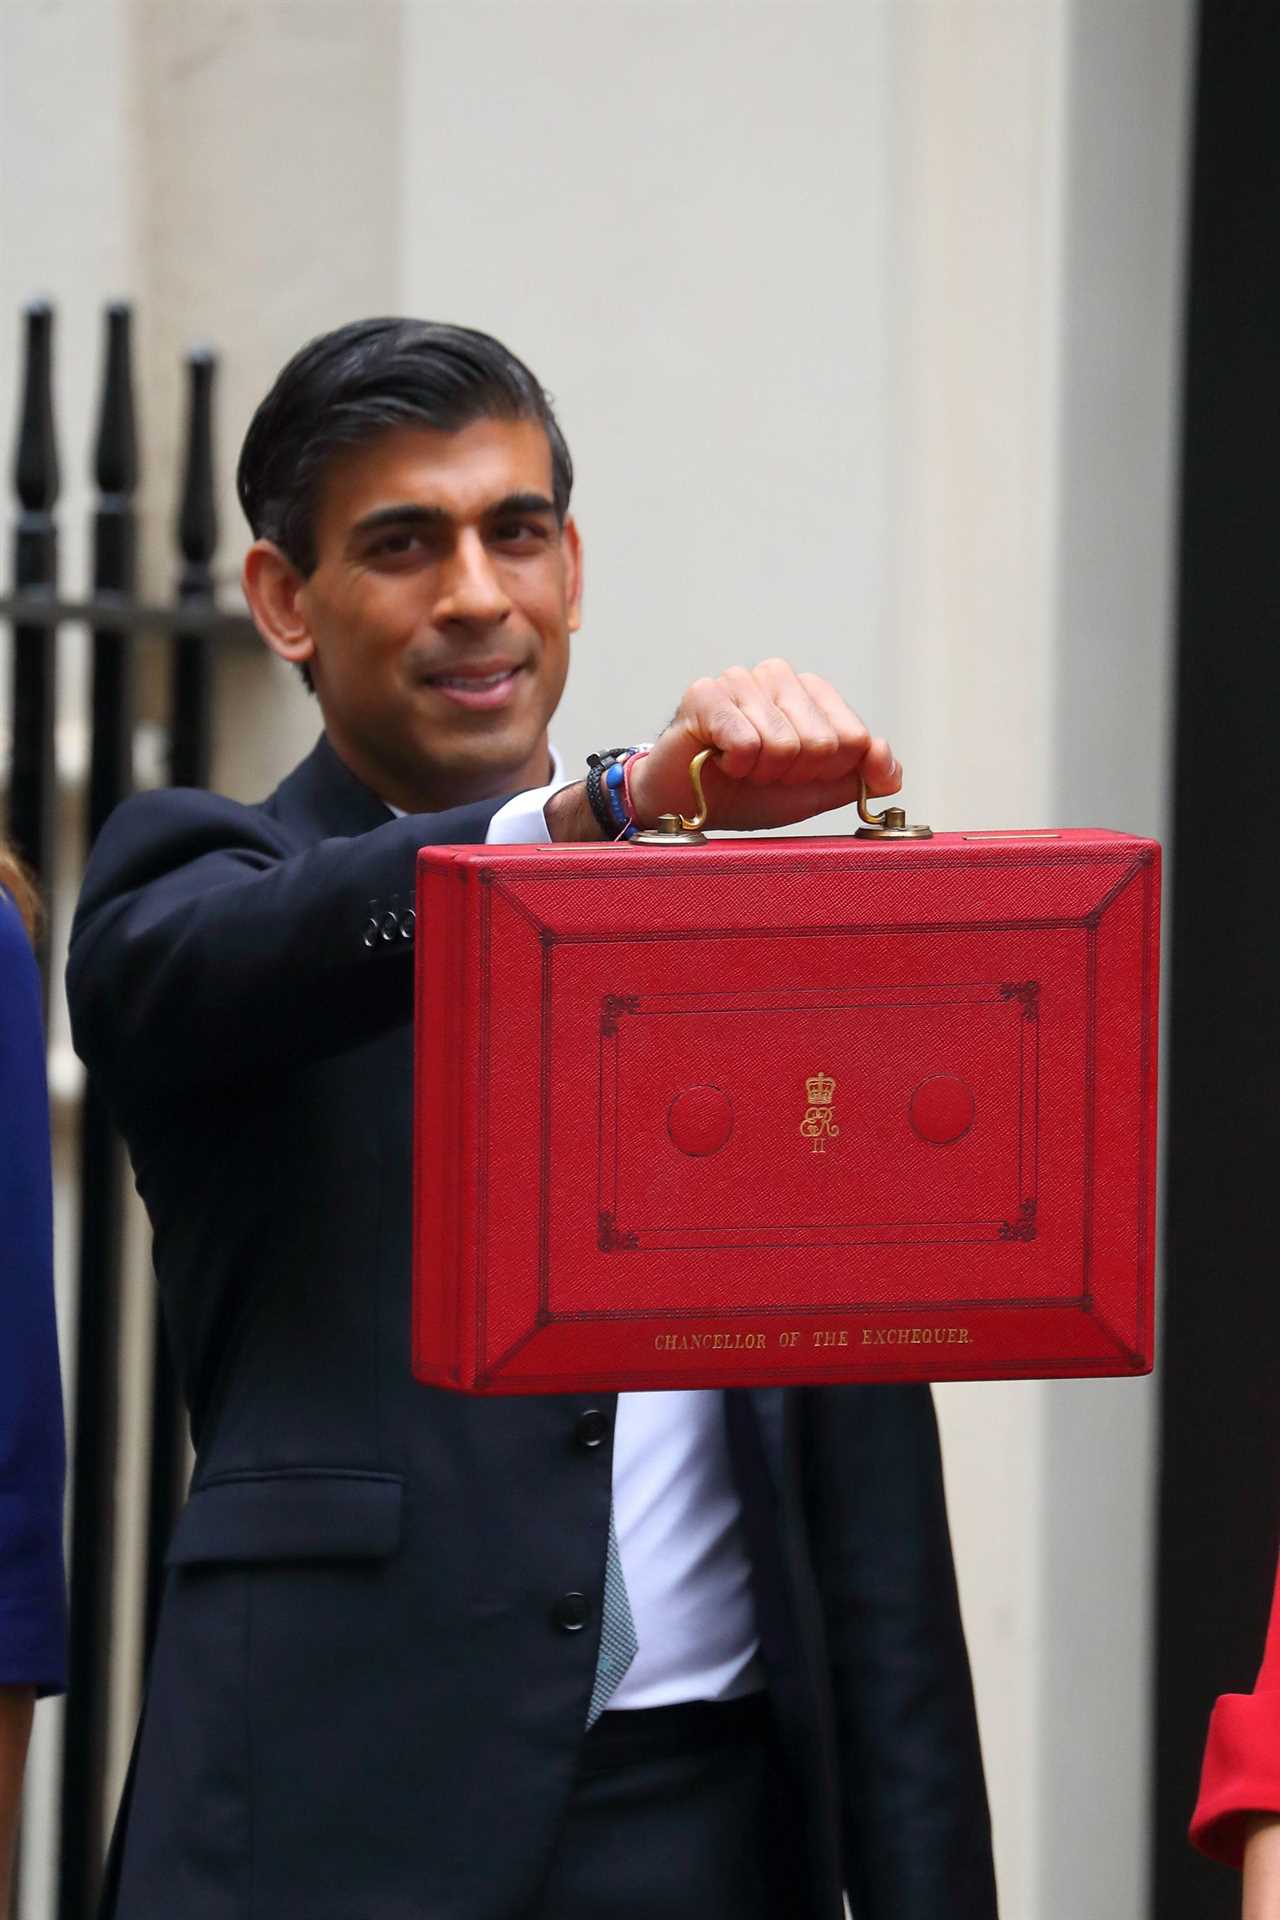 Rishi Sunak supporters claim he’s the only candidate who can fix Britain’s economic woes